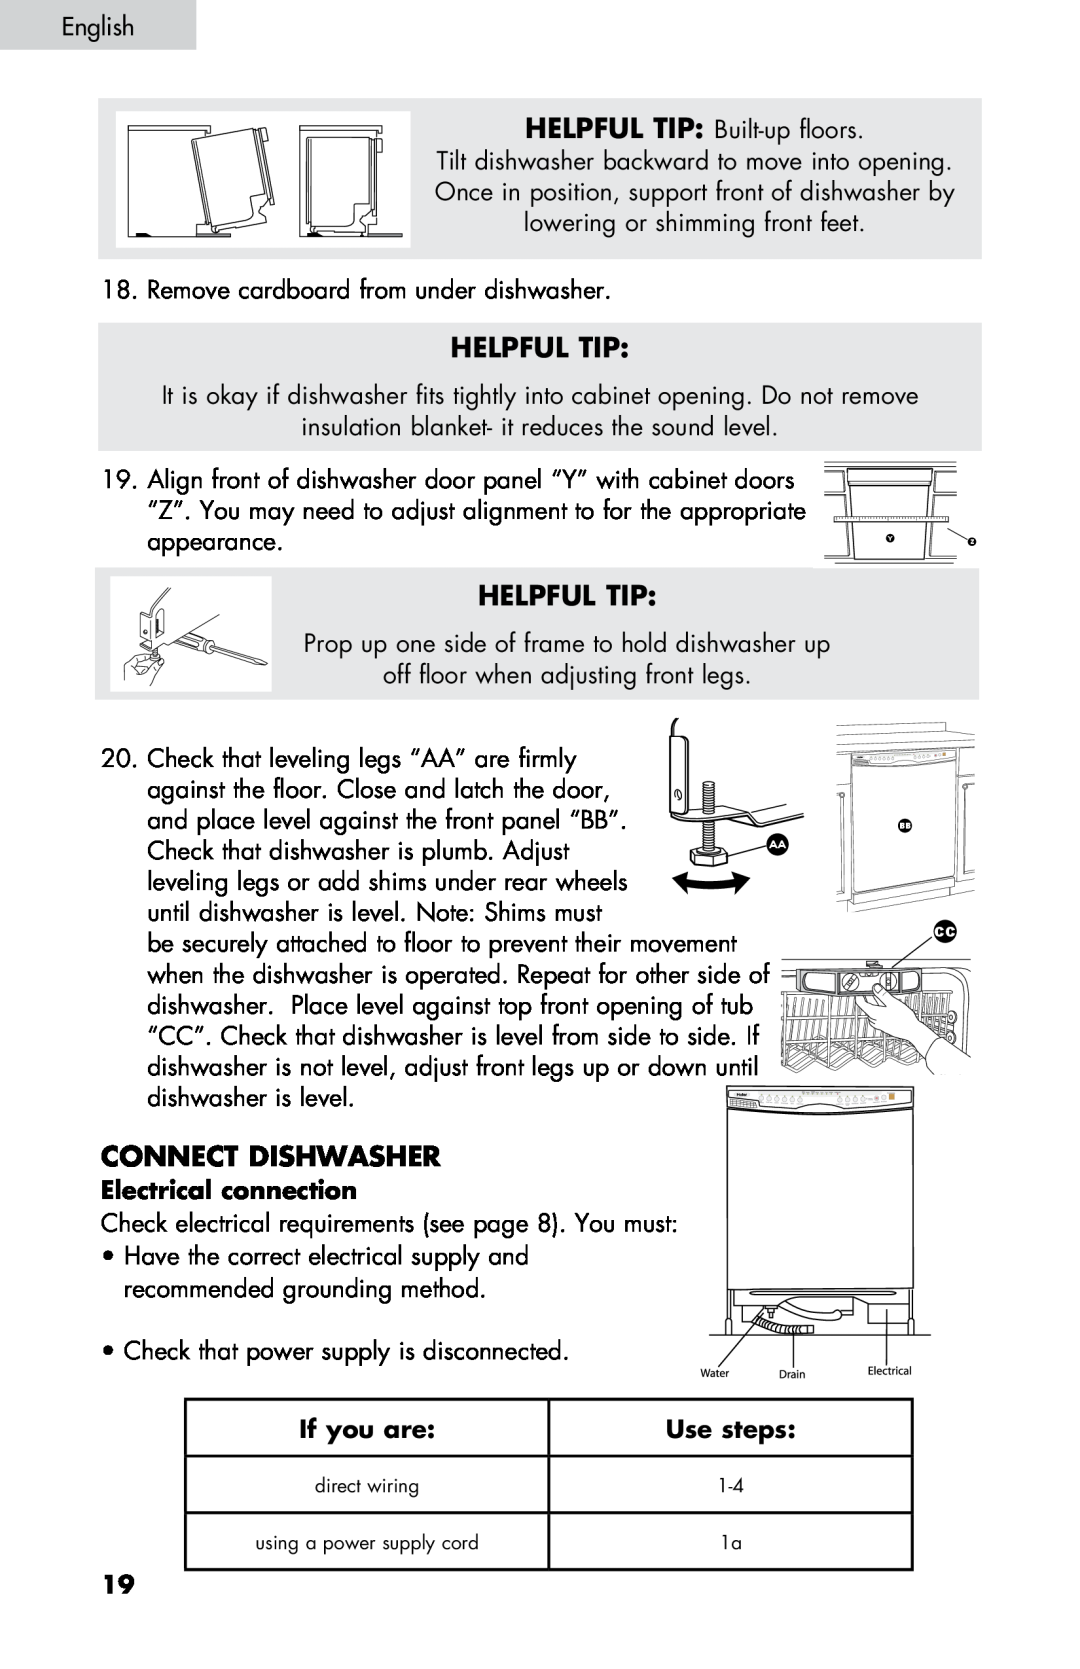 Haier DW-7777-01 manual Connect dishwasher, Electrical connection, Helpful Tip, If you are, Use steps 